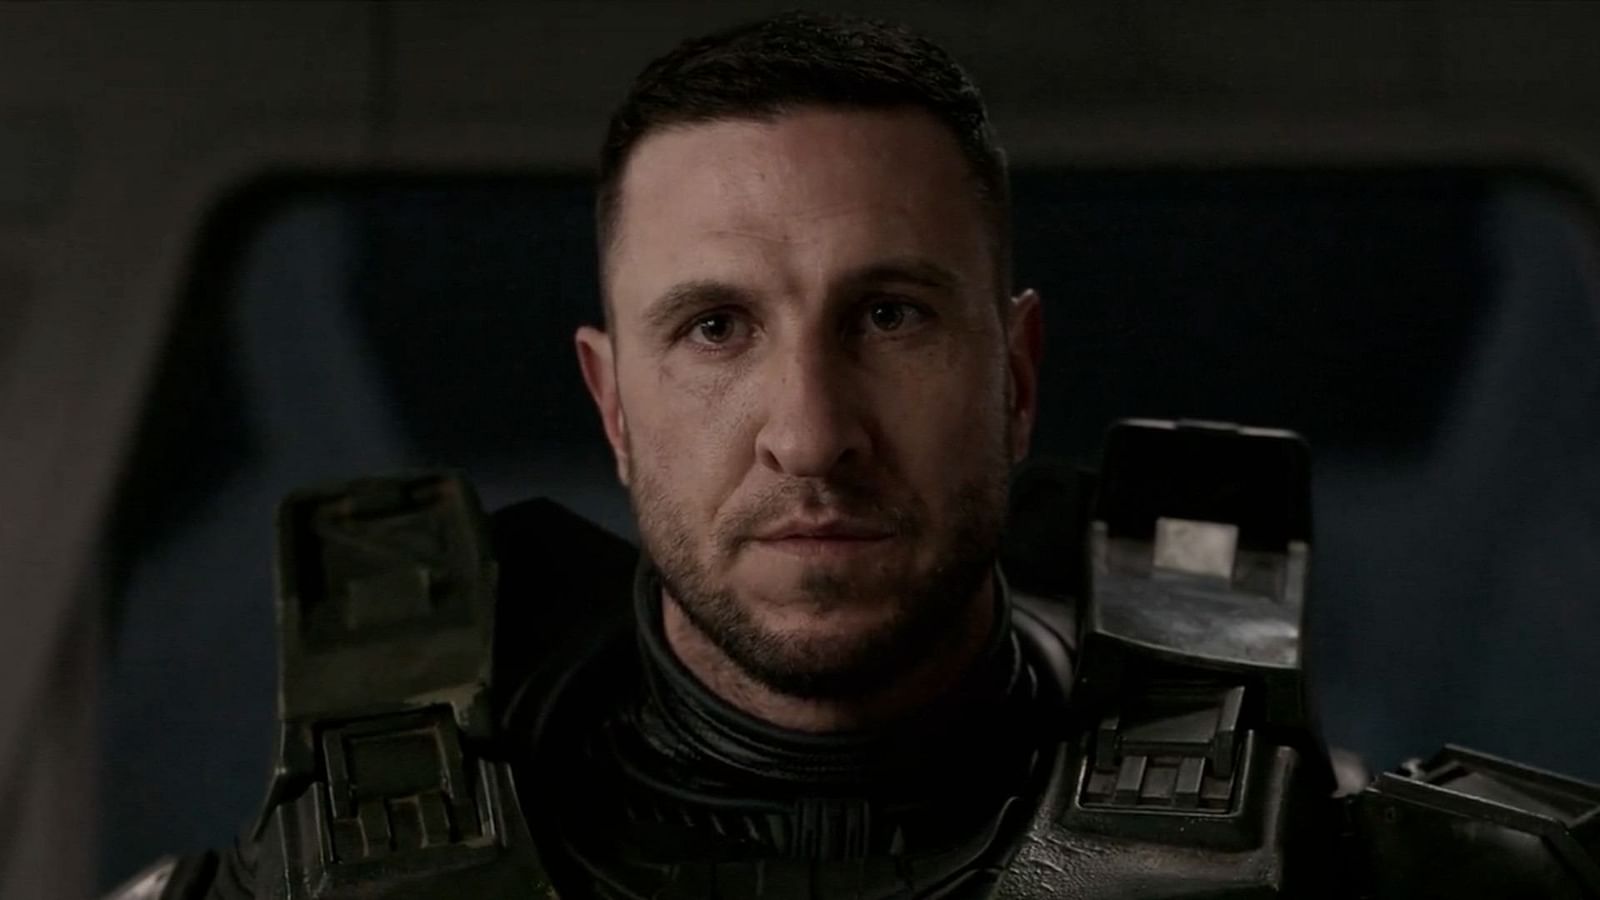 Halo TV series: 5 reasons it went wrong (and 5 ways it can improve in S2)